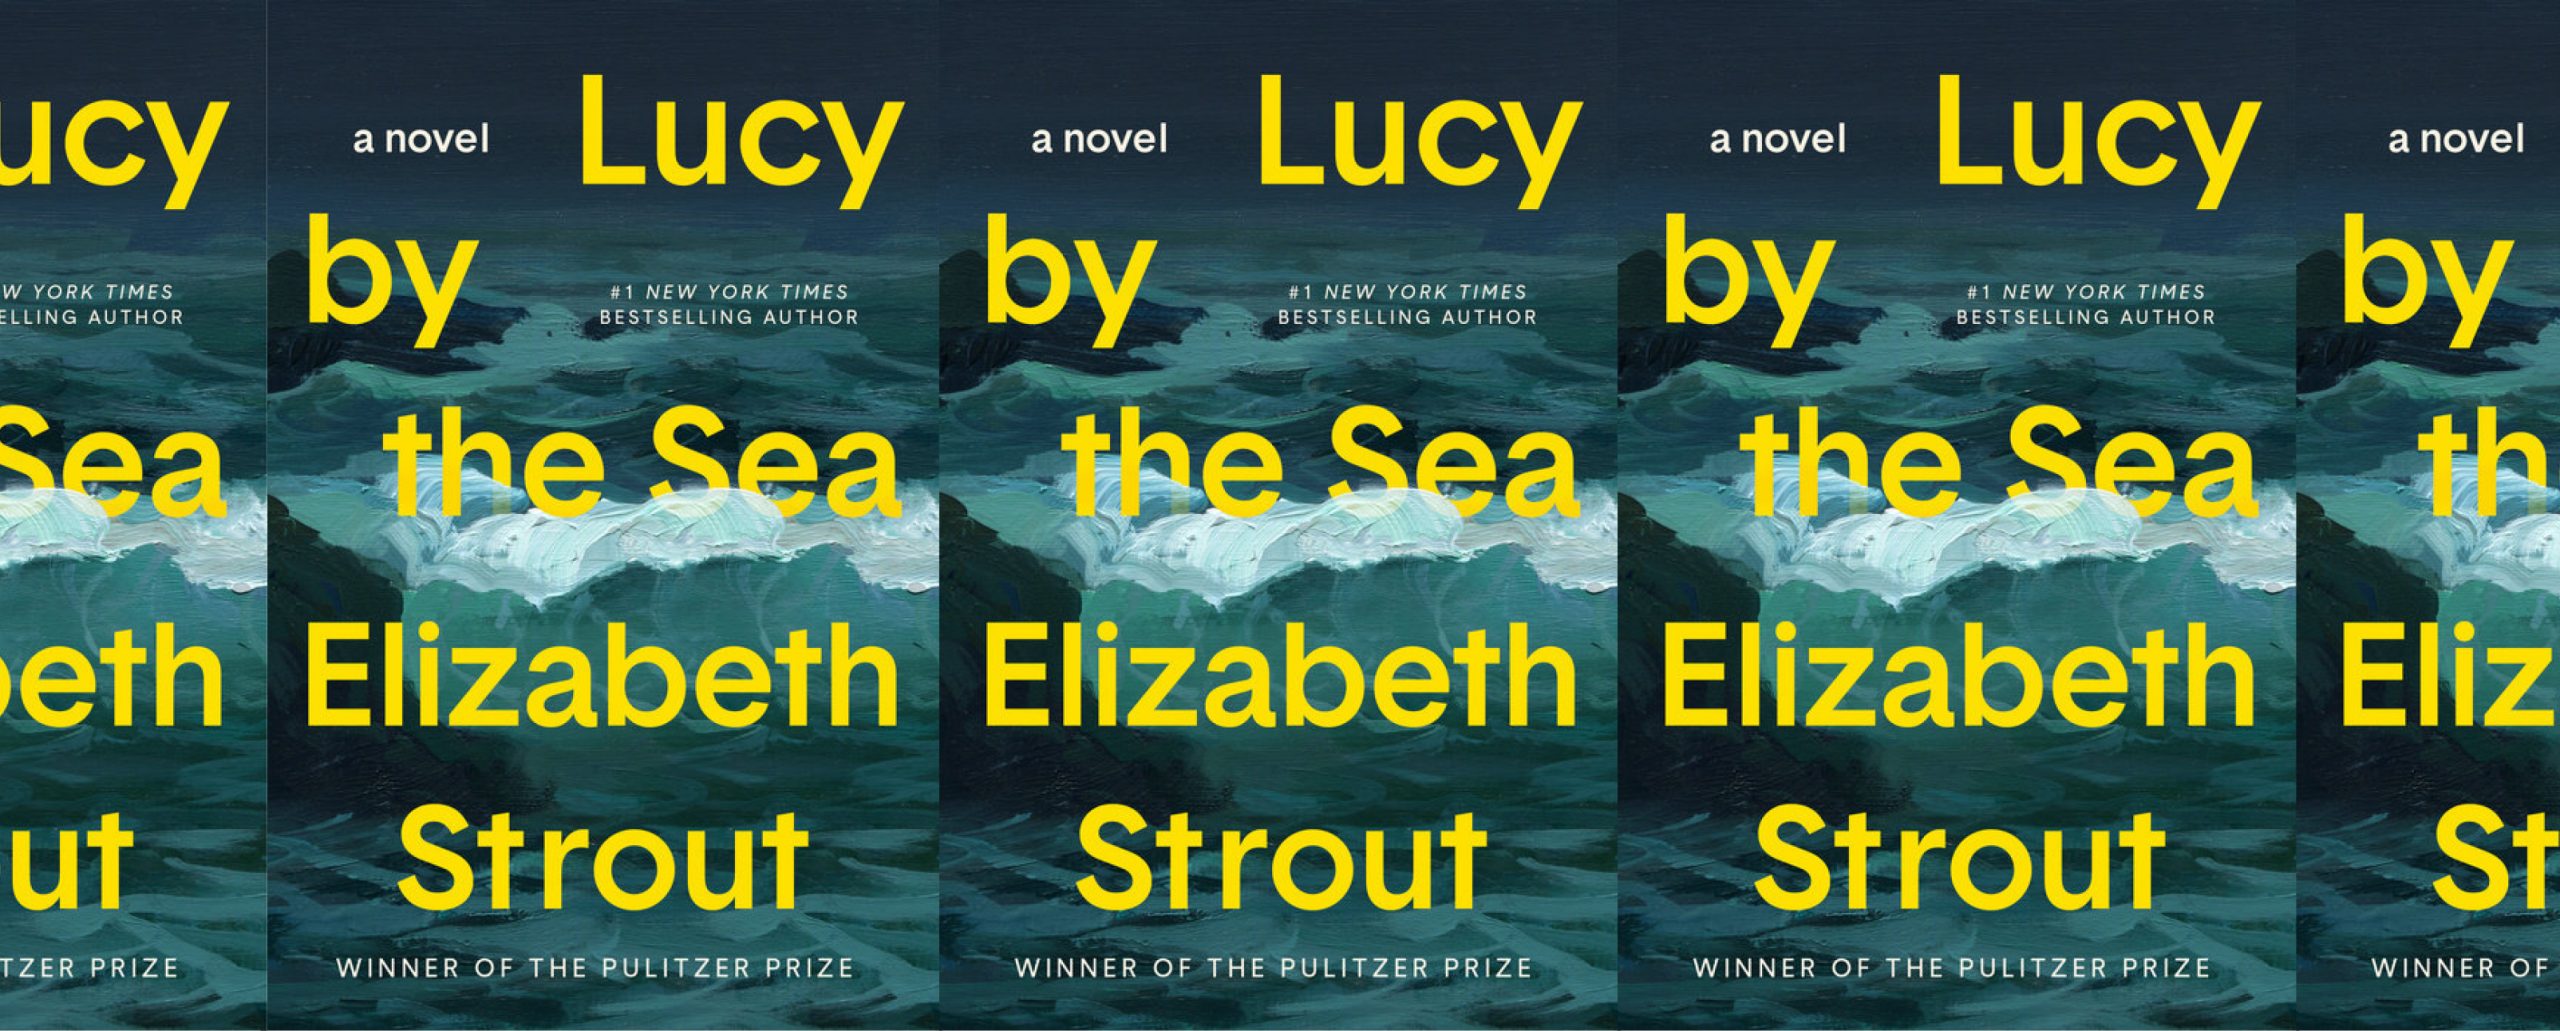 the book cover for Lucy by the Sea, featuring a painting of a dark and stormy sea